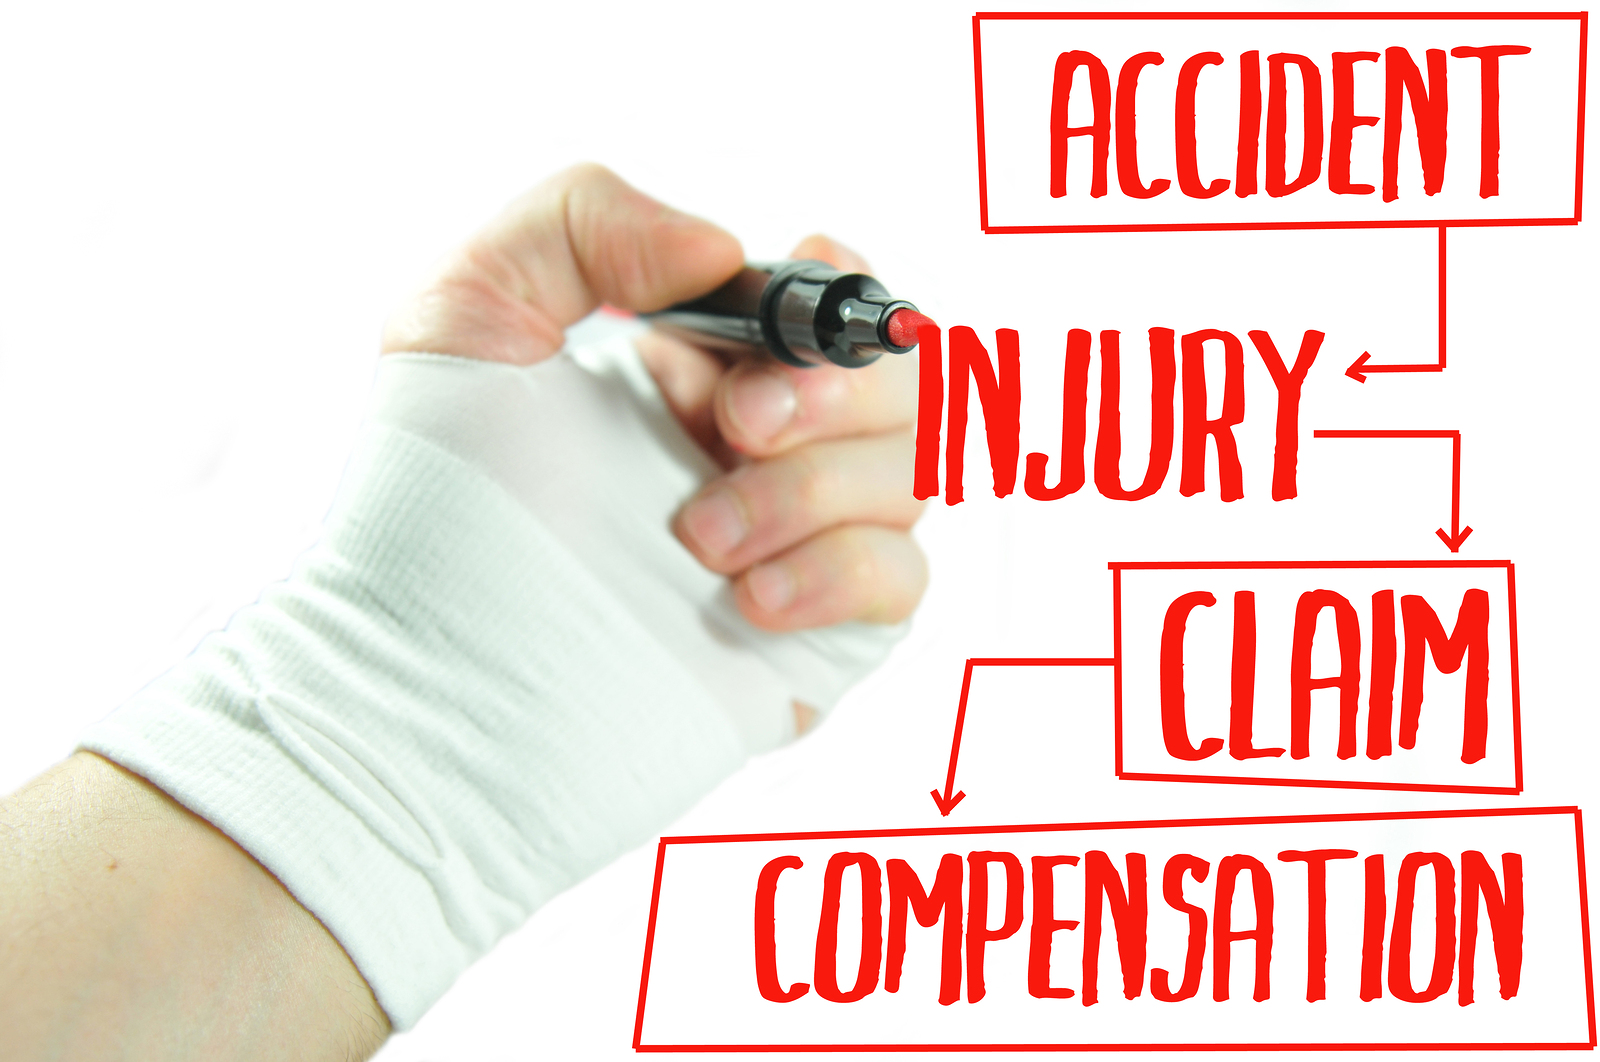 Personal Injury Claim v. Worker’s Compensation Claim